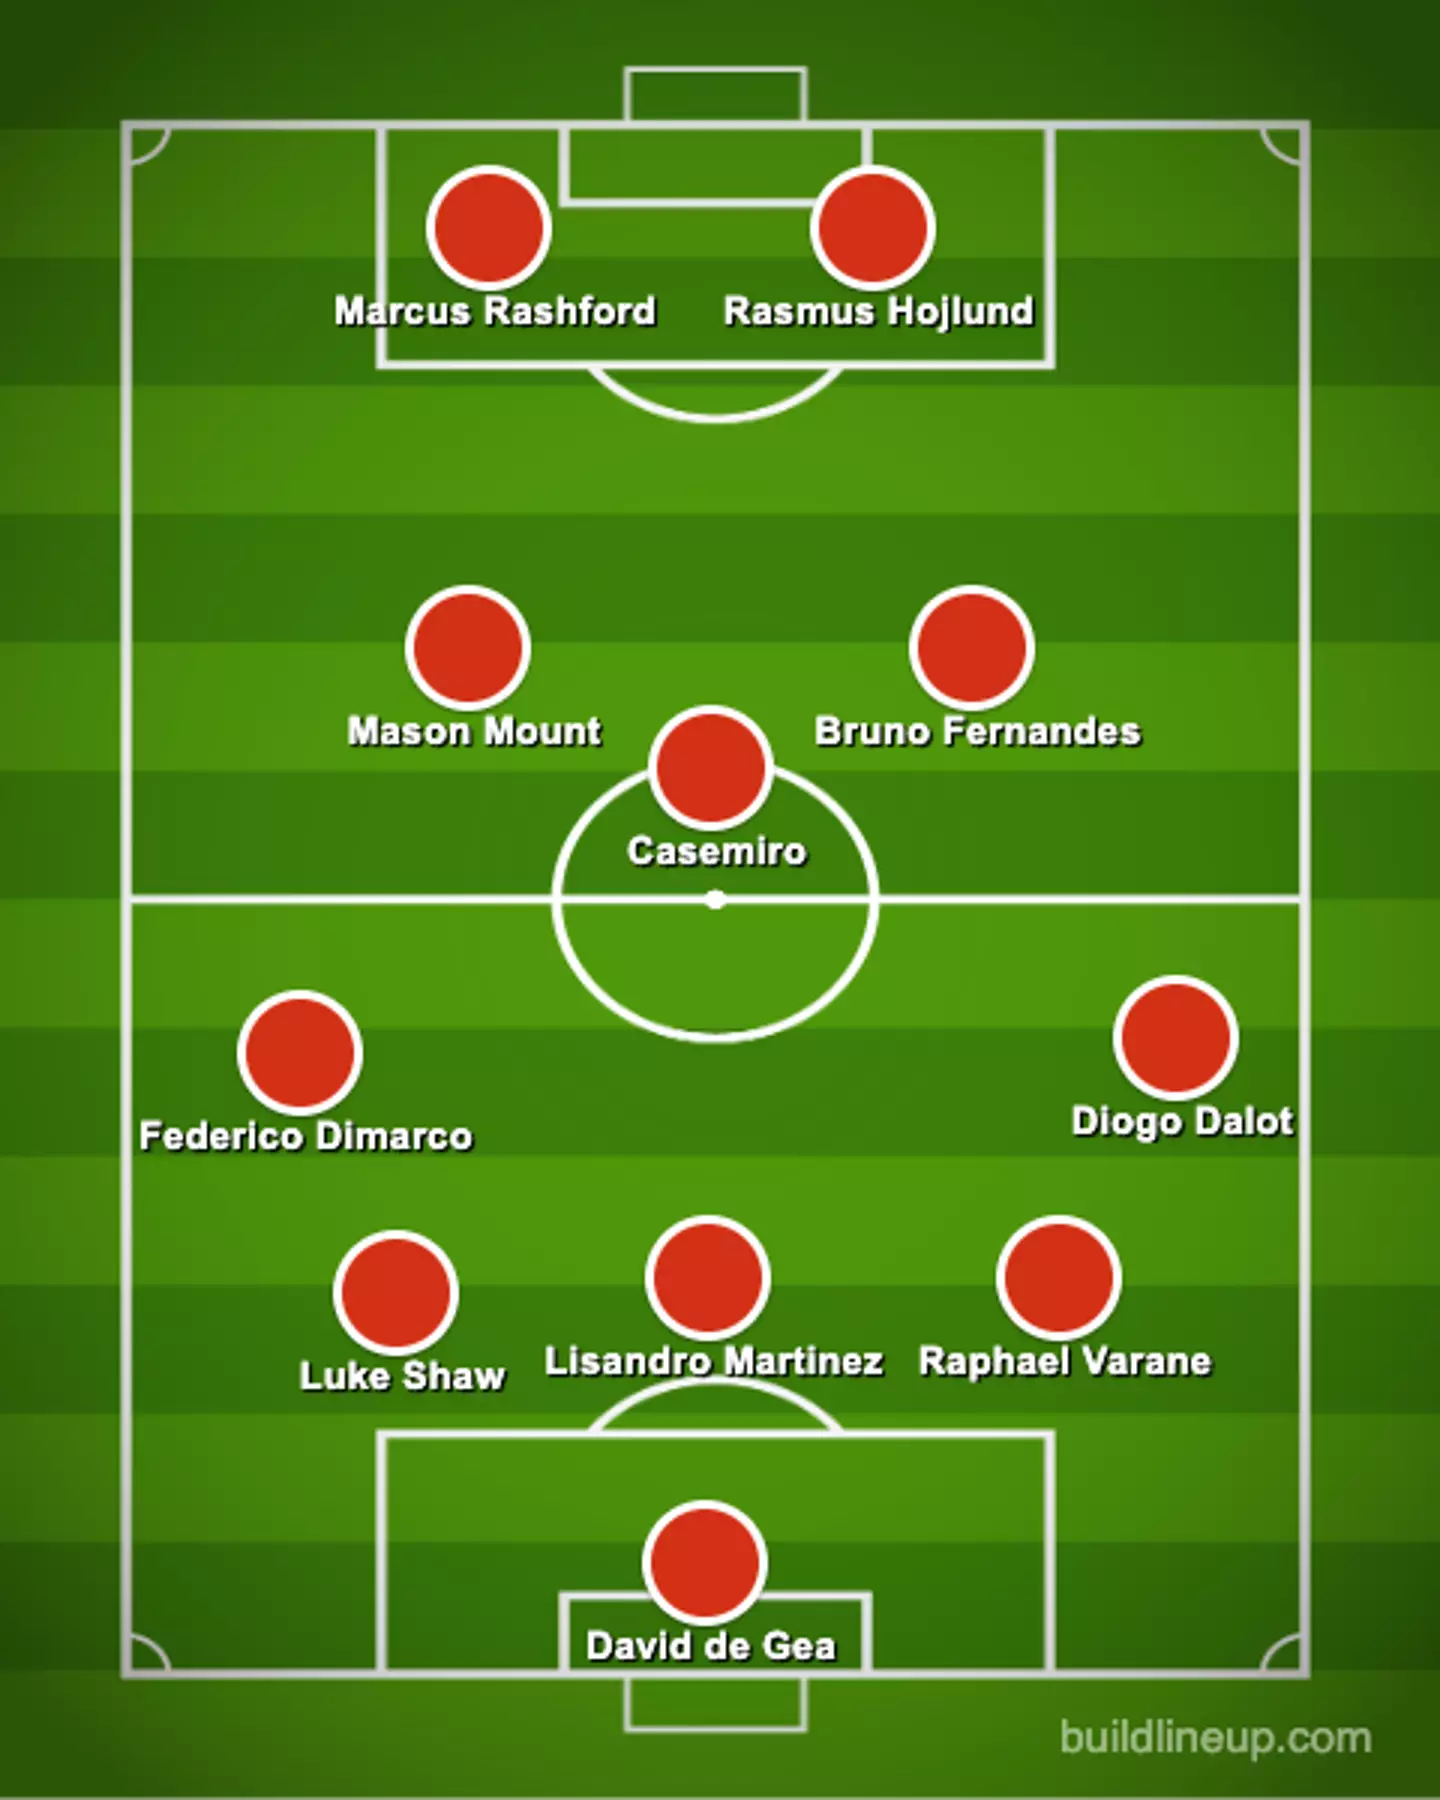 How Ten Hag could put out a team if he changes formation.